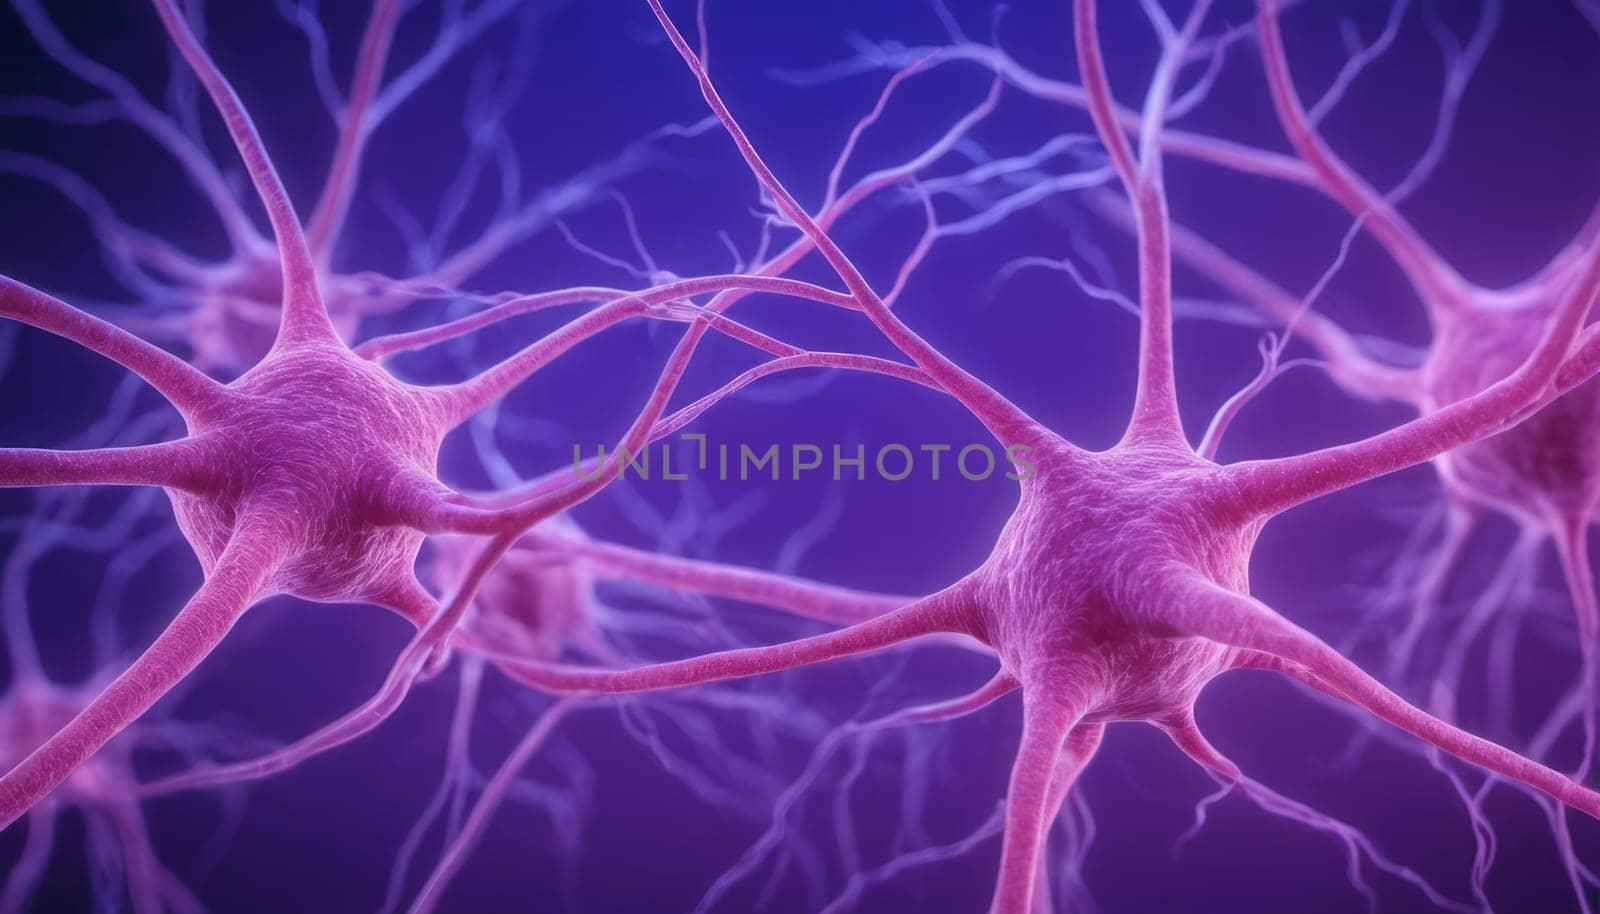 The image presents a detailed view of neurons, the core components of the nervous system, depicted in purple against a darker purple background, showcasing their complex network